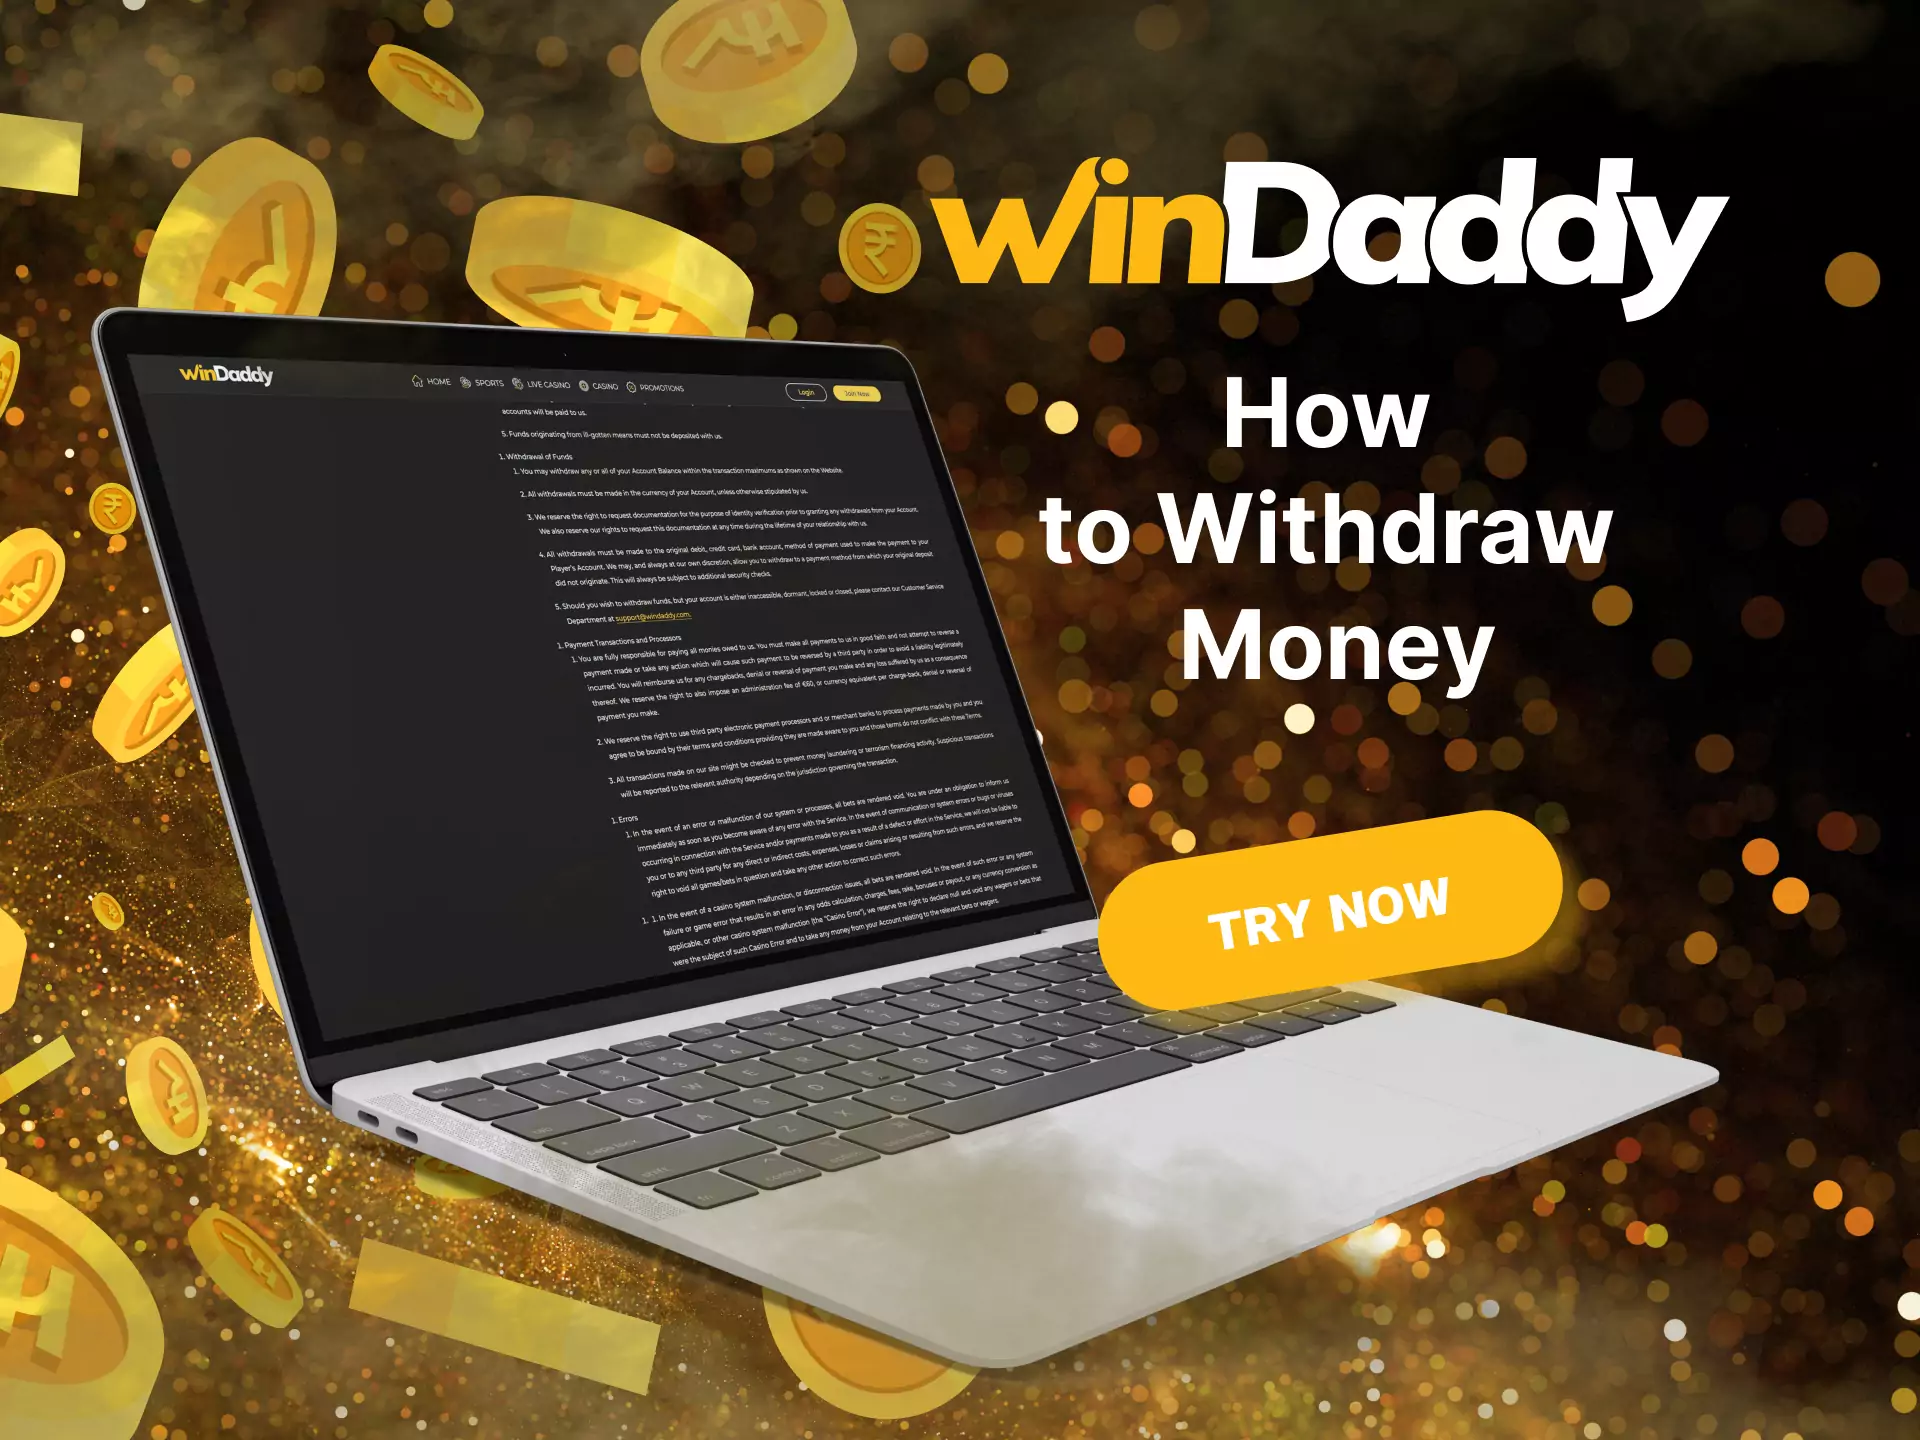 Windaddy supports many methods of making a withdrawal.